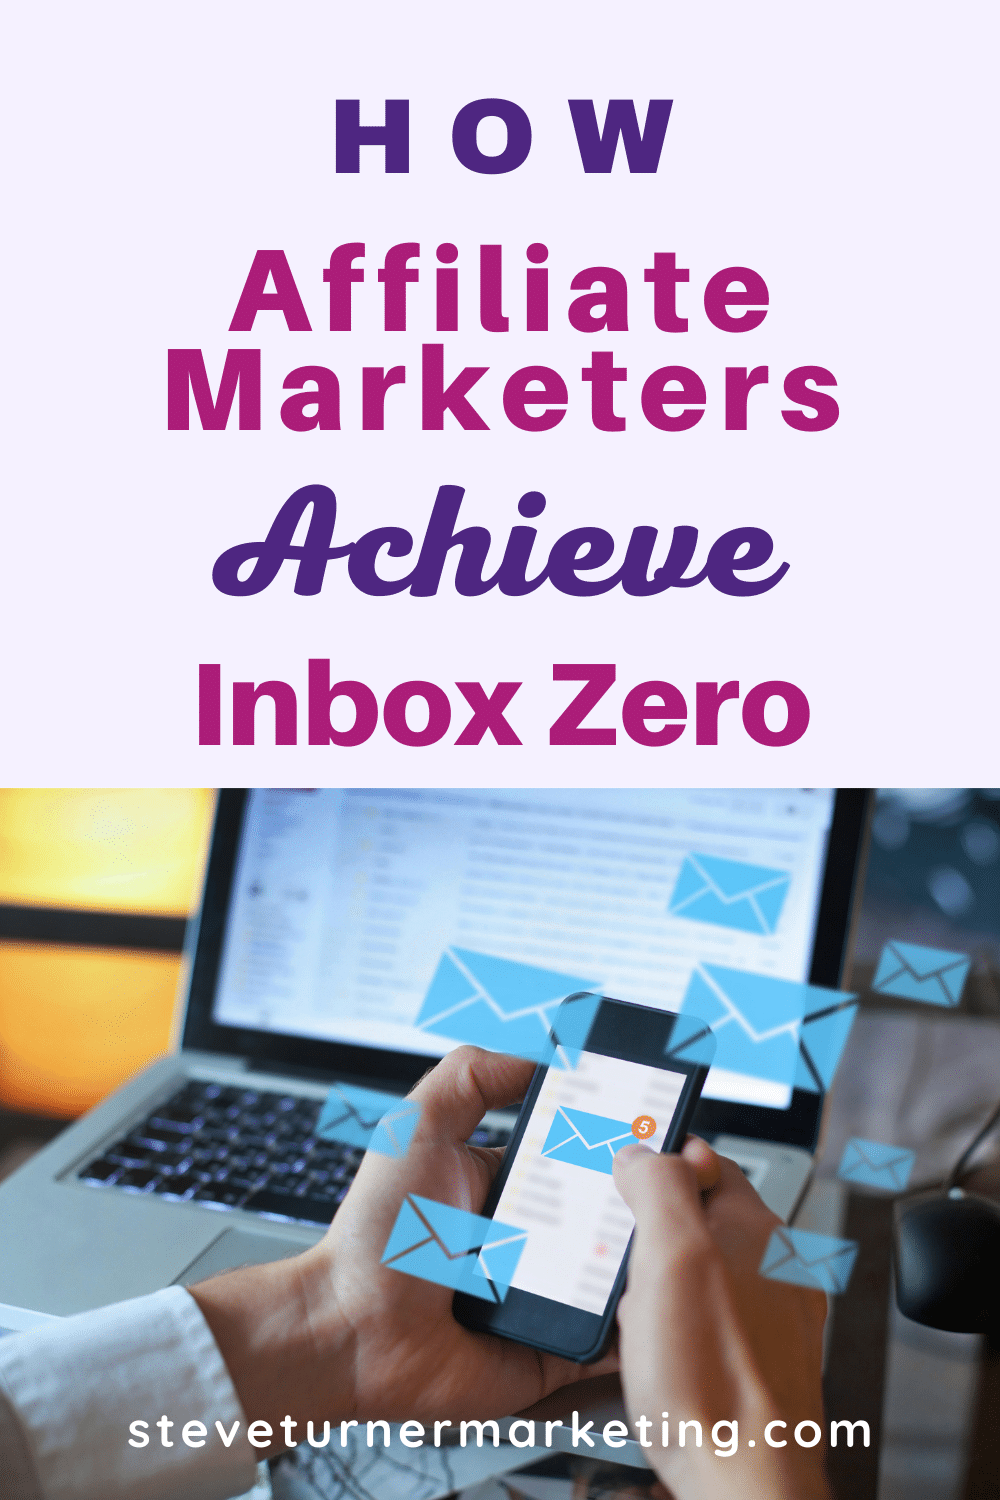 How To Achieve Inbox Zero In 2021 As An Affiliate Marketer